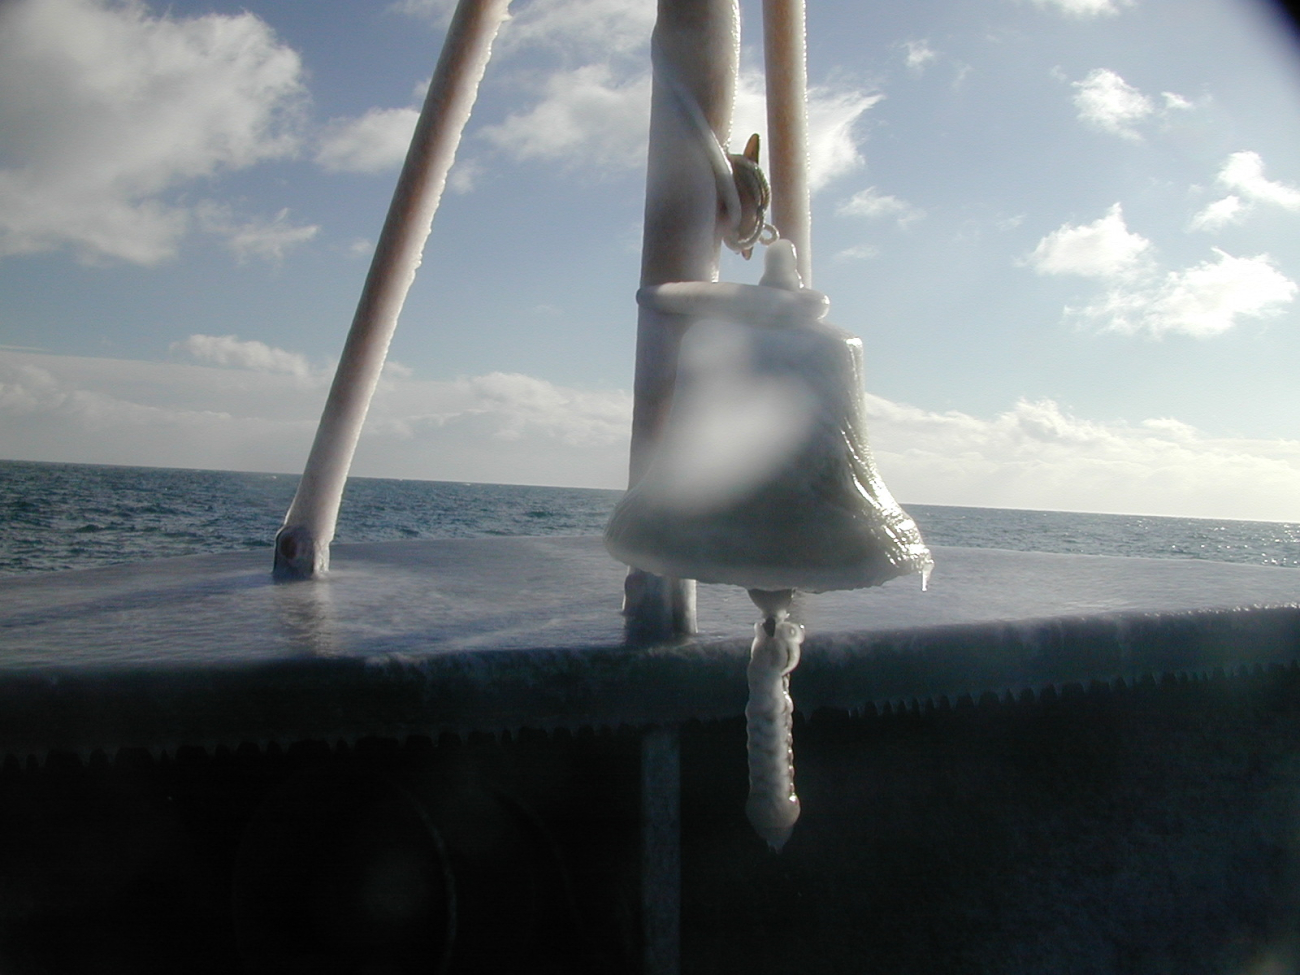 A glaze of ice covering the MILLER FREEMAN's ship's bell